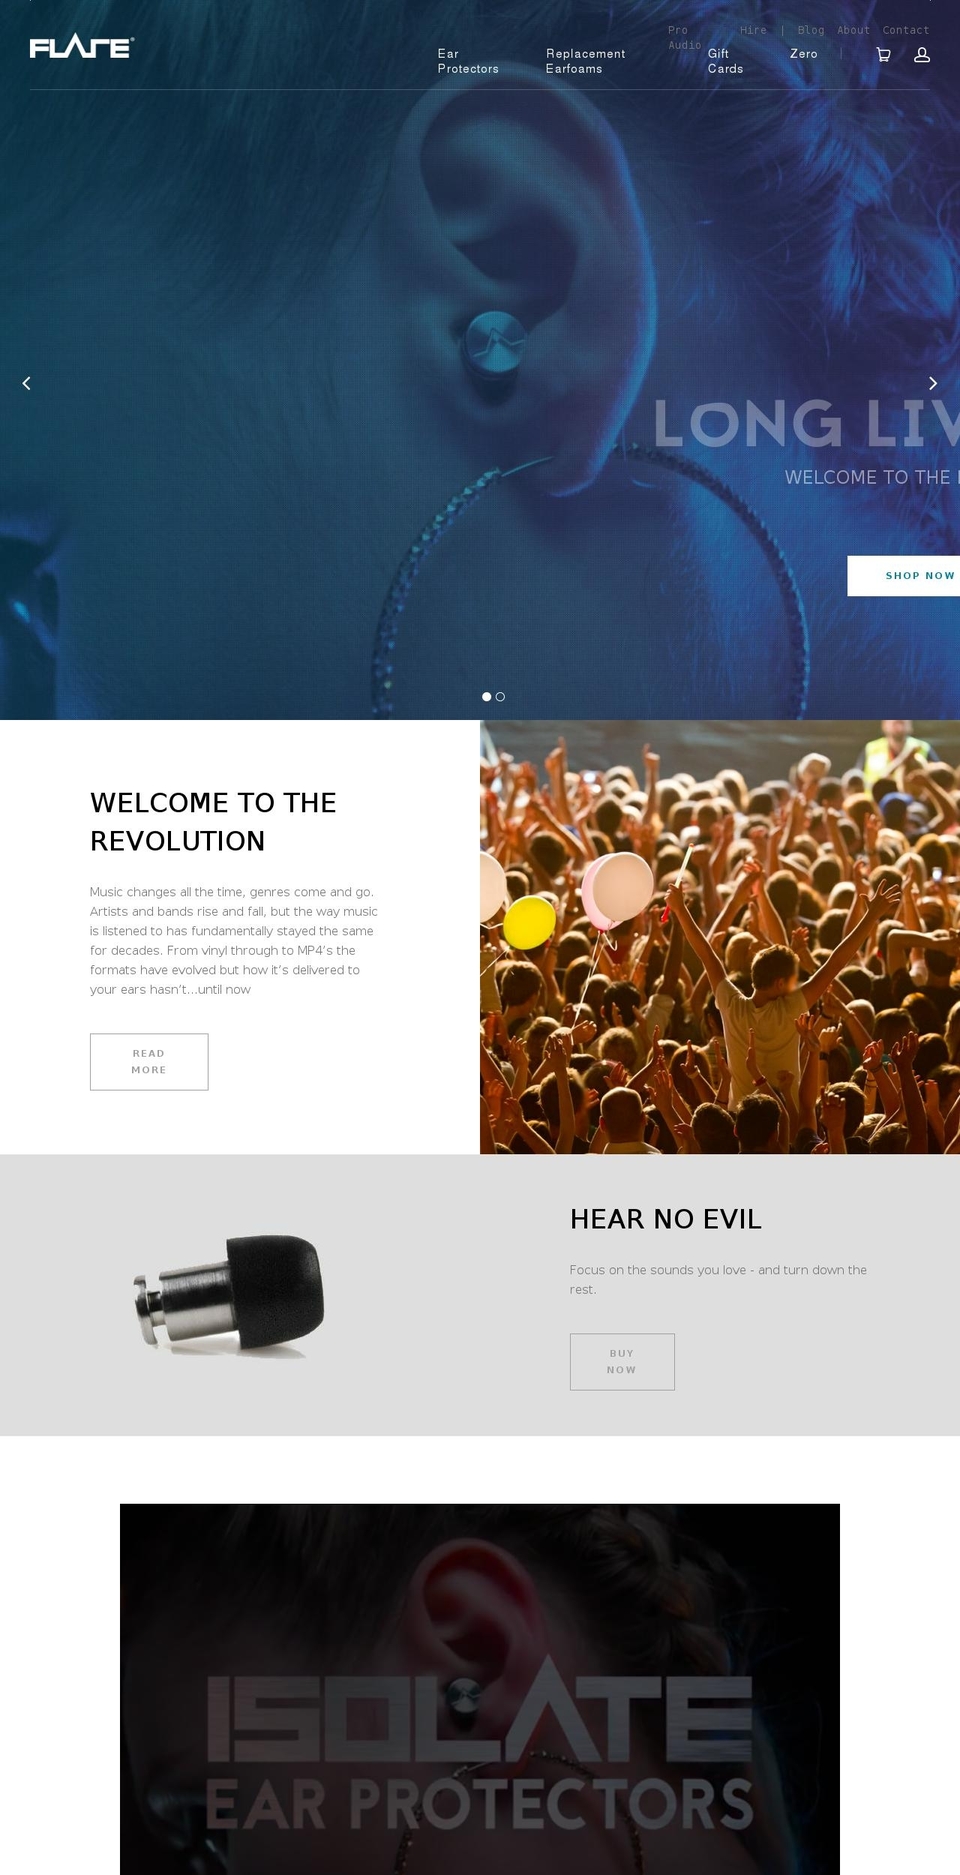 Launch Shopify theme site example flareaudio.com